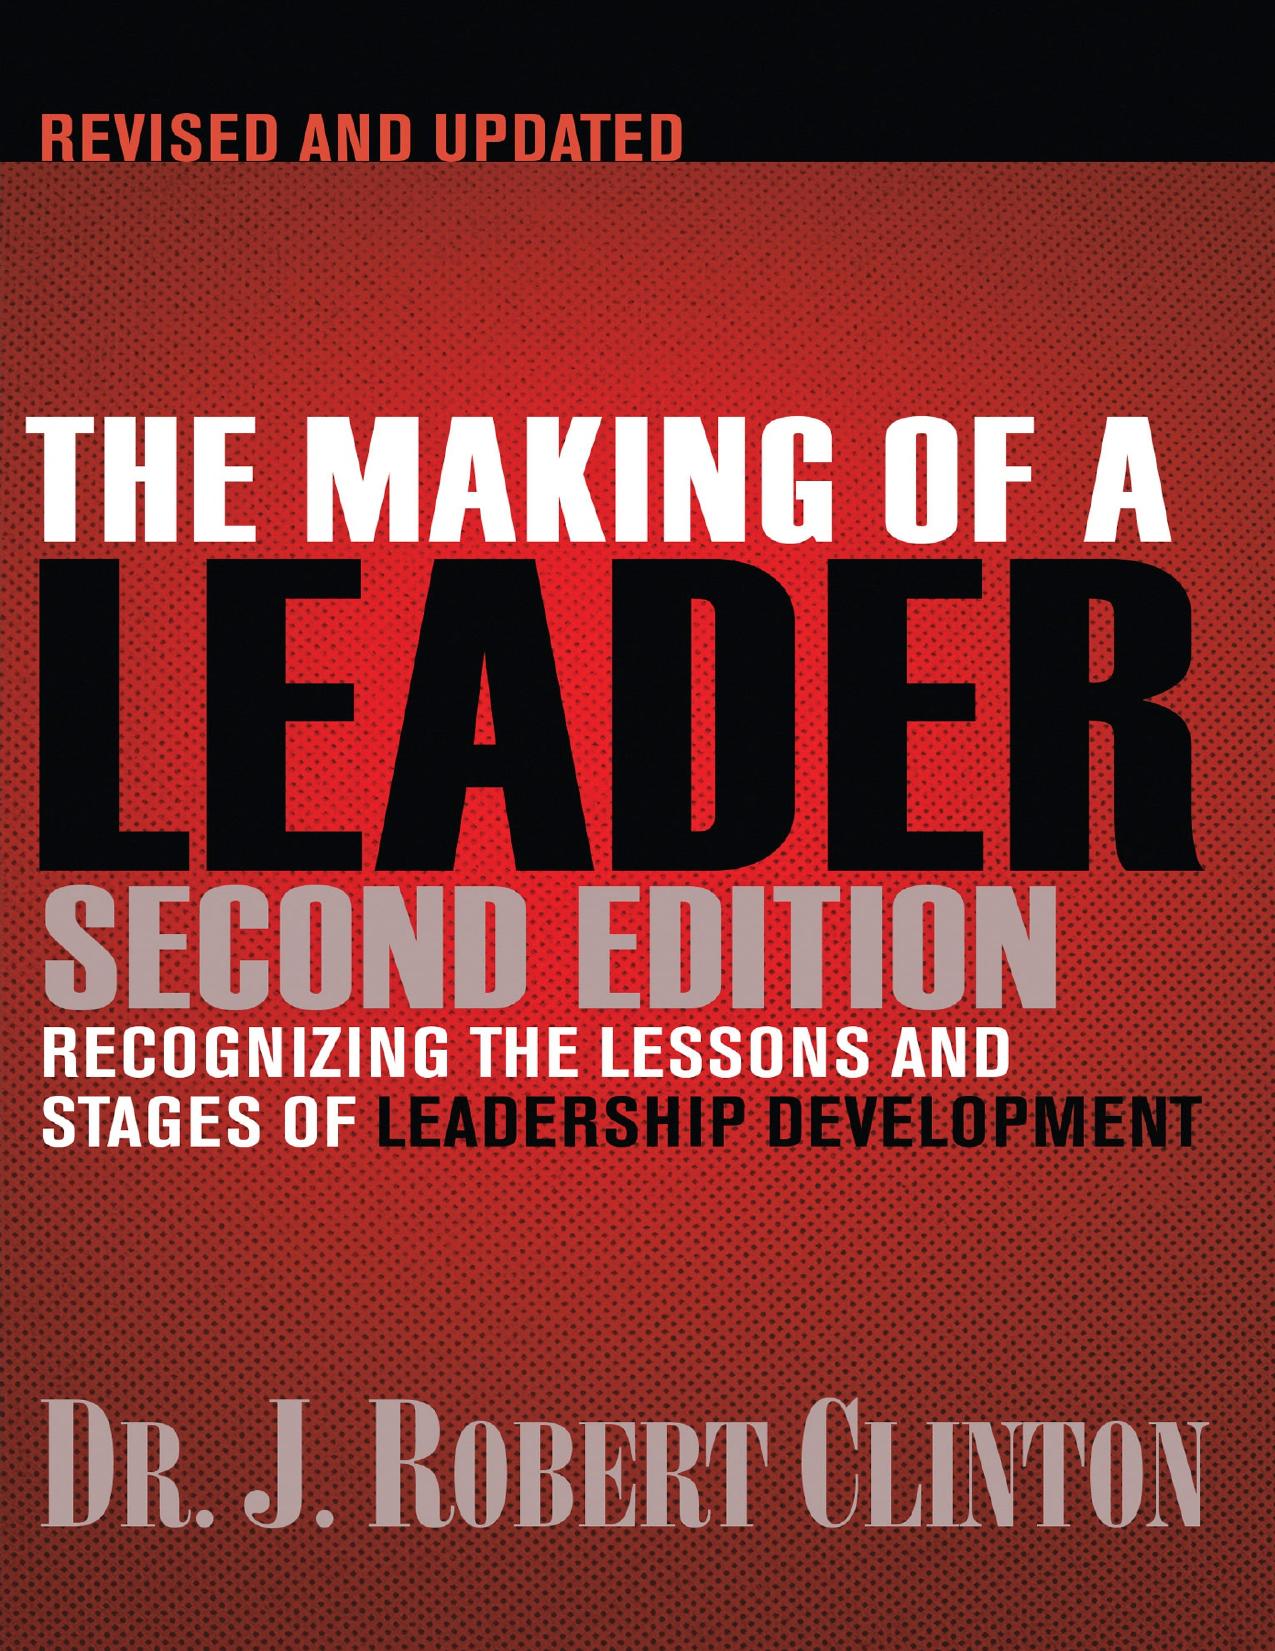 The Making of a Leader by Robert Clinton